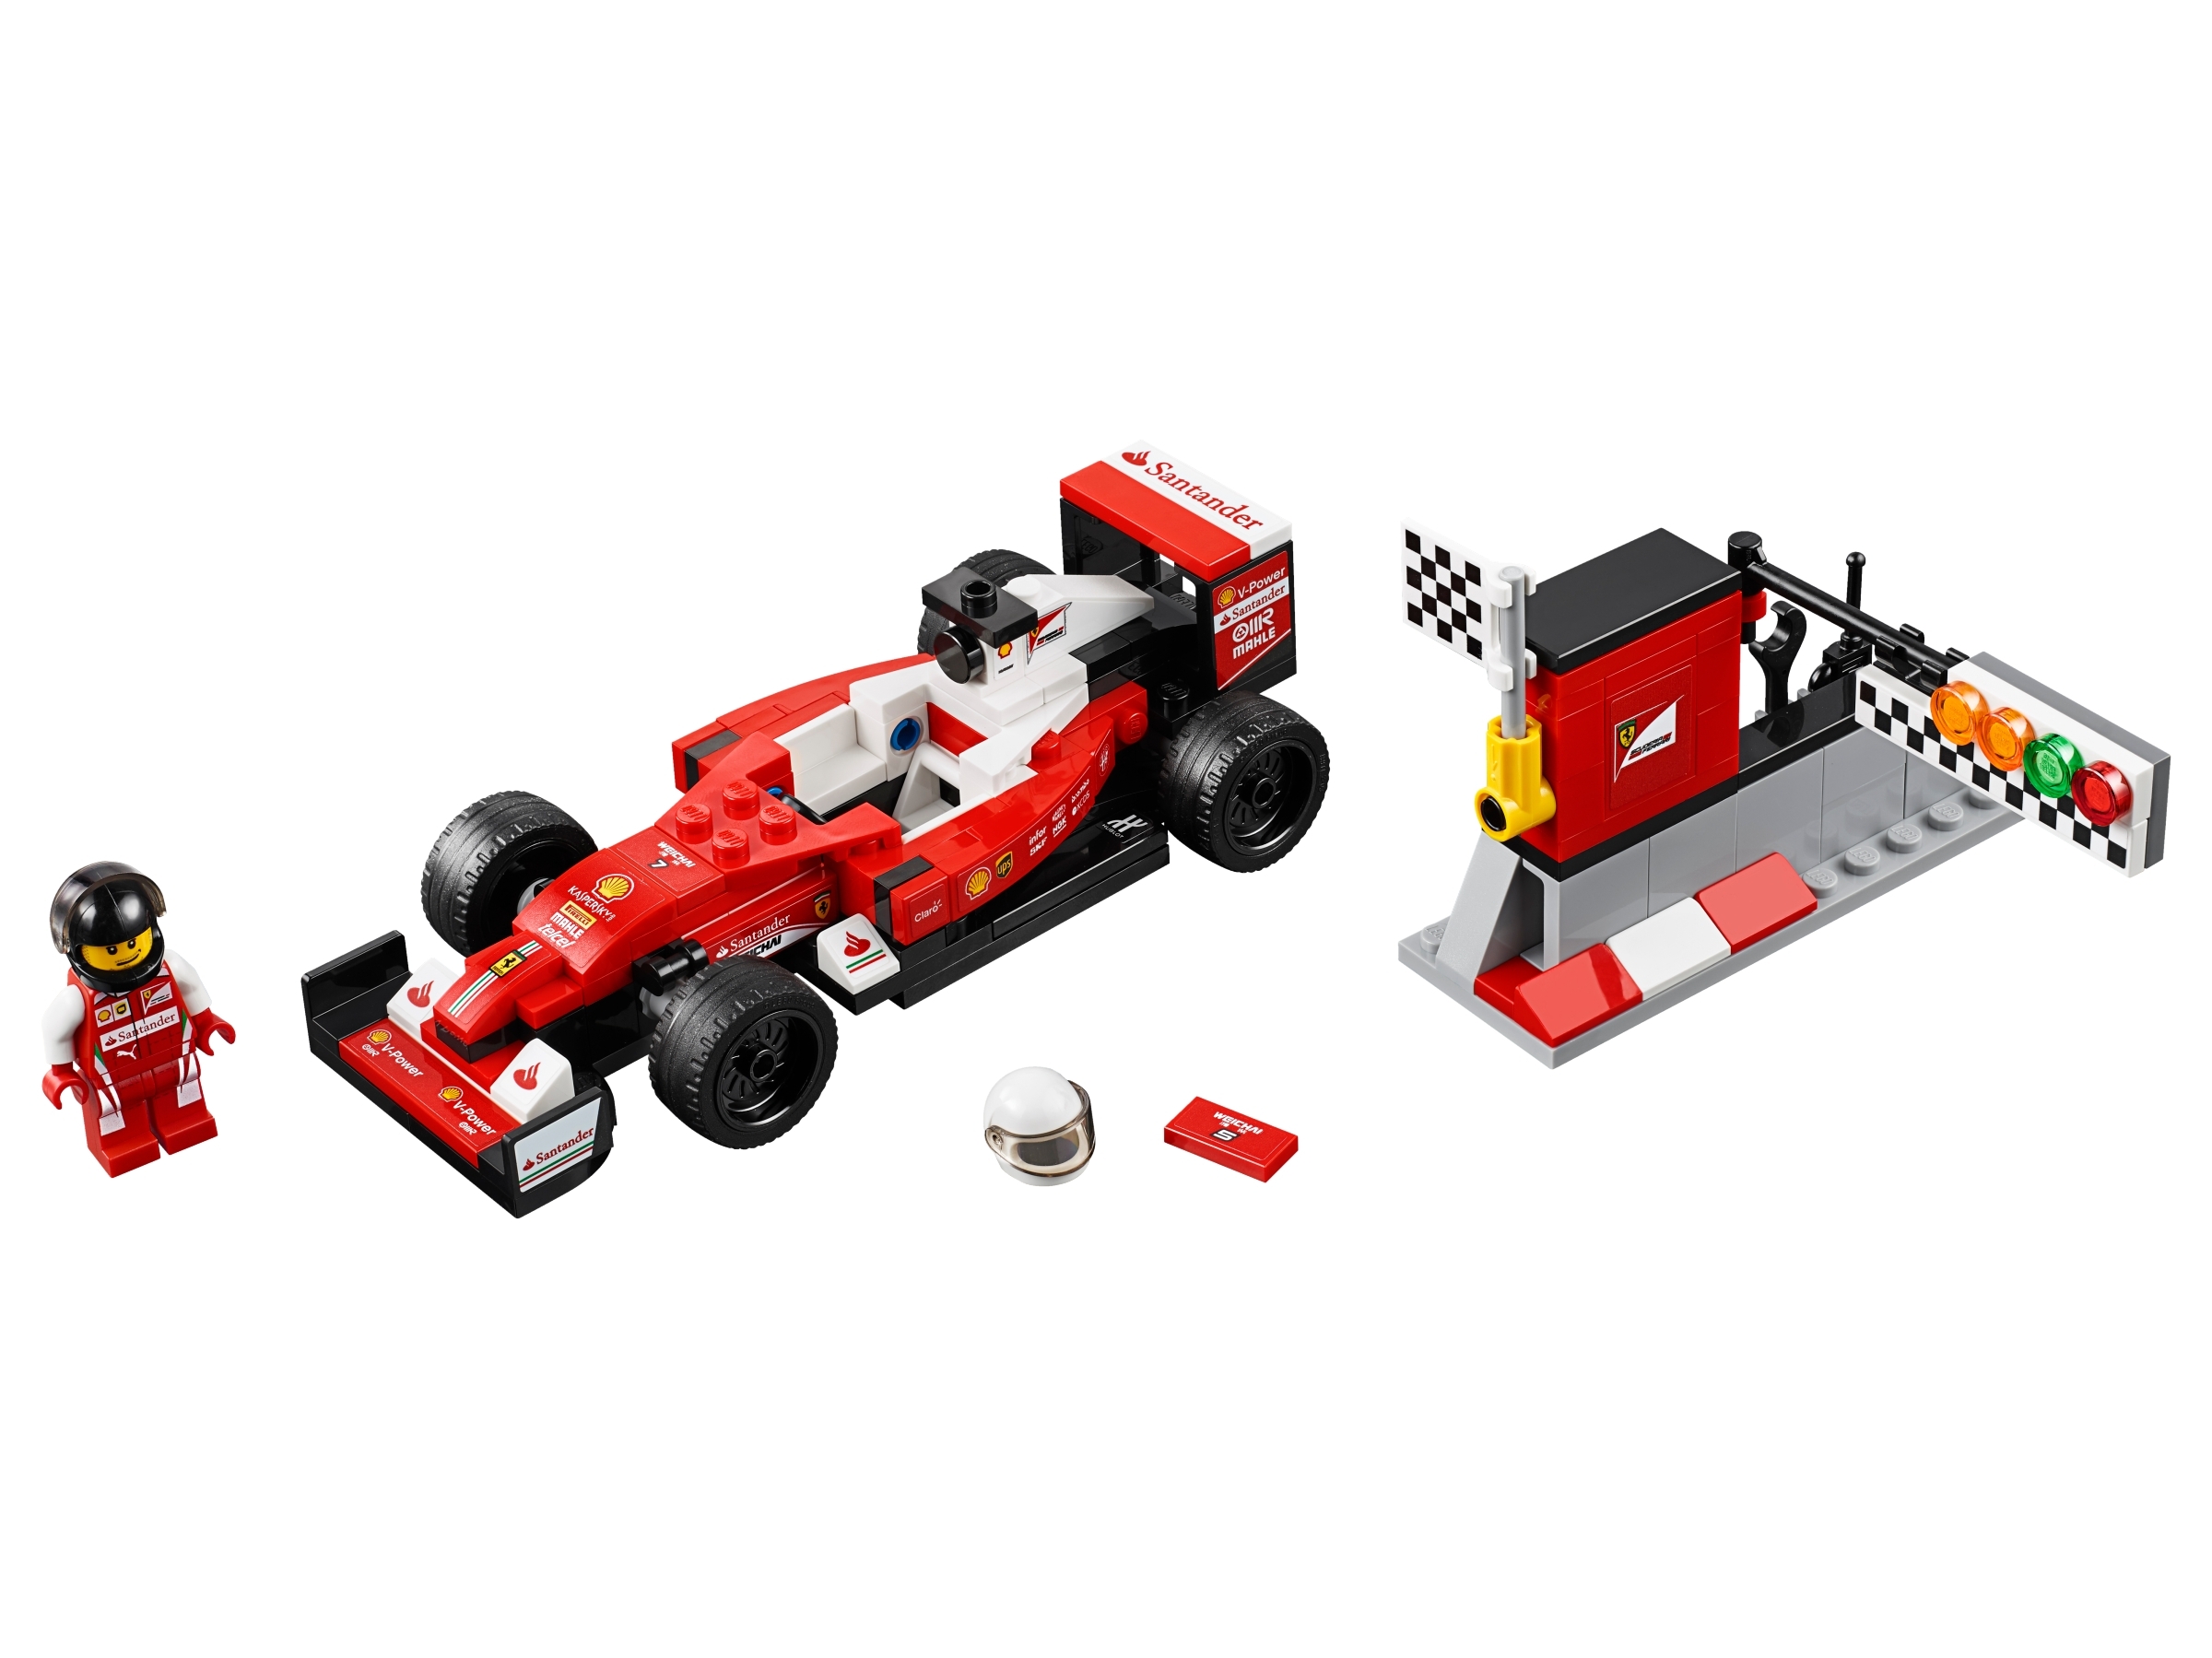 Scuderia SF16-H 75879 | Speed | Buy online at the Official LEGO® US